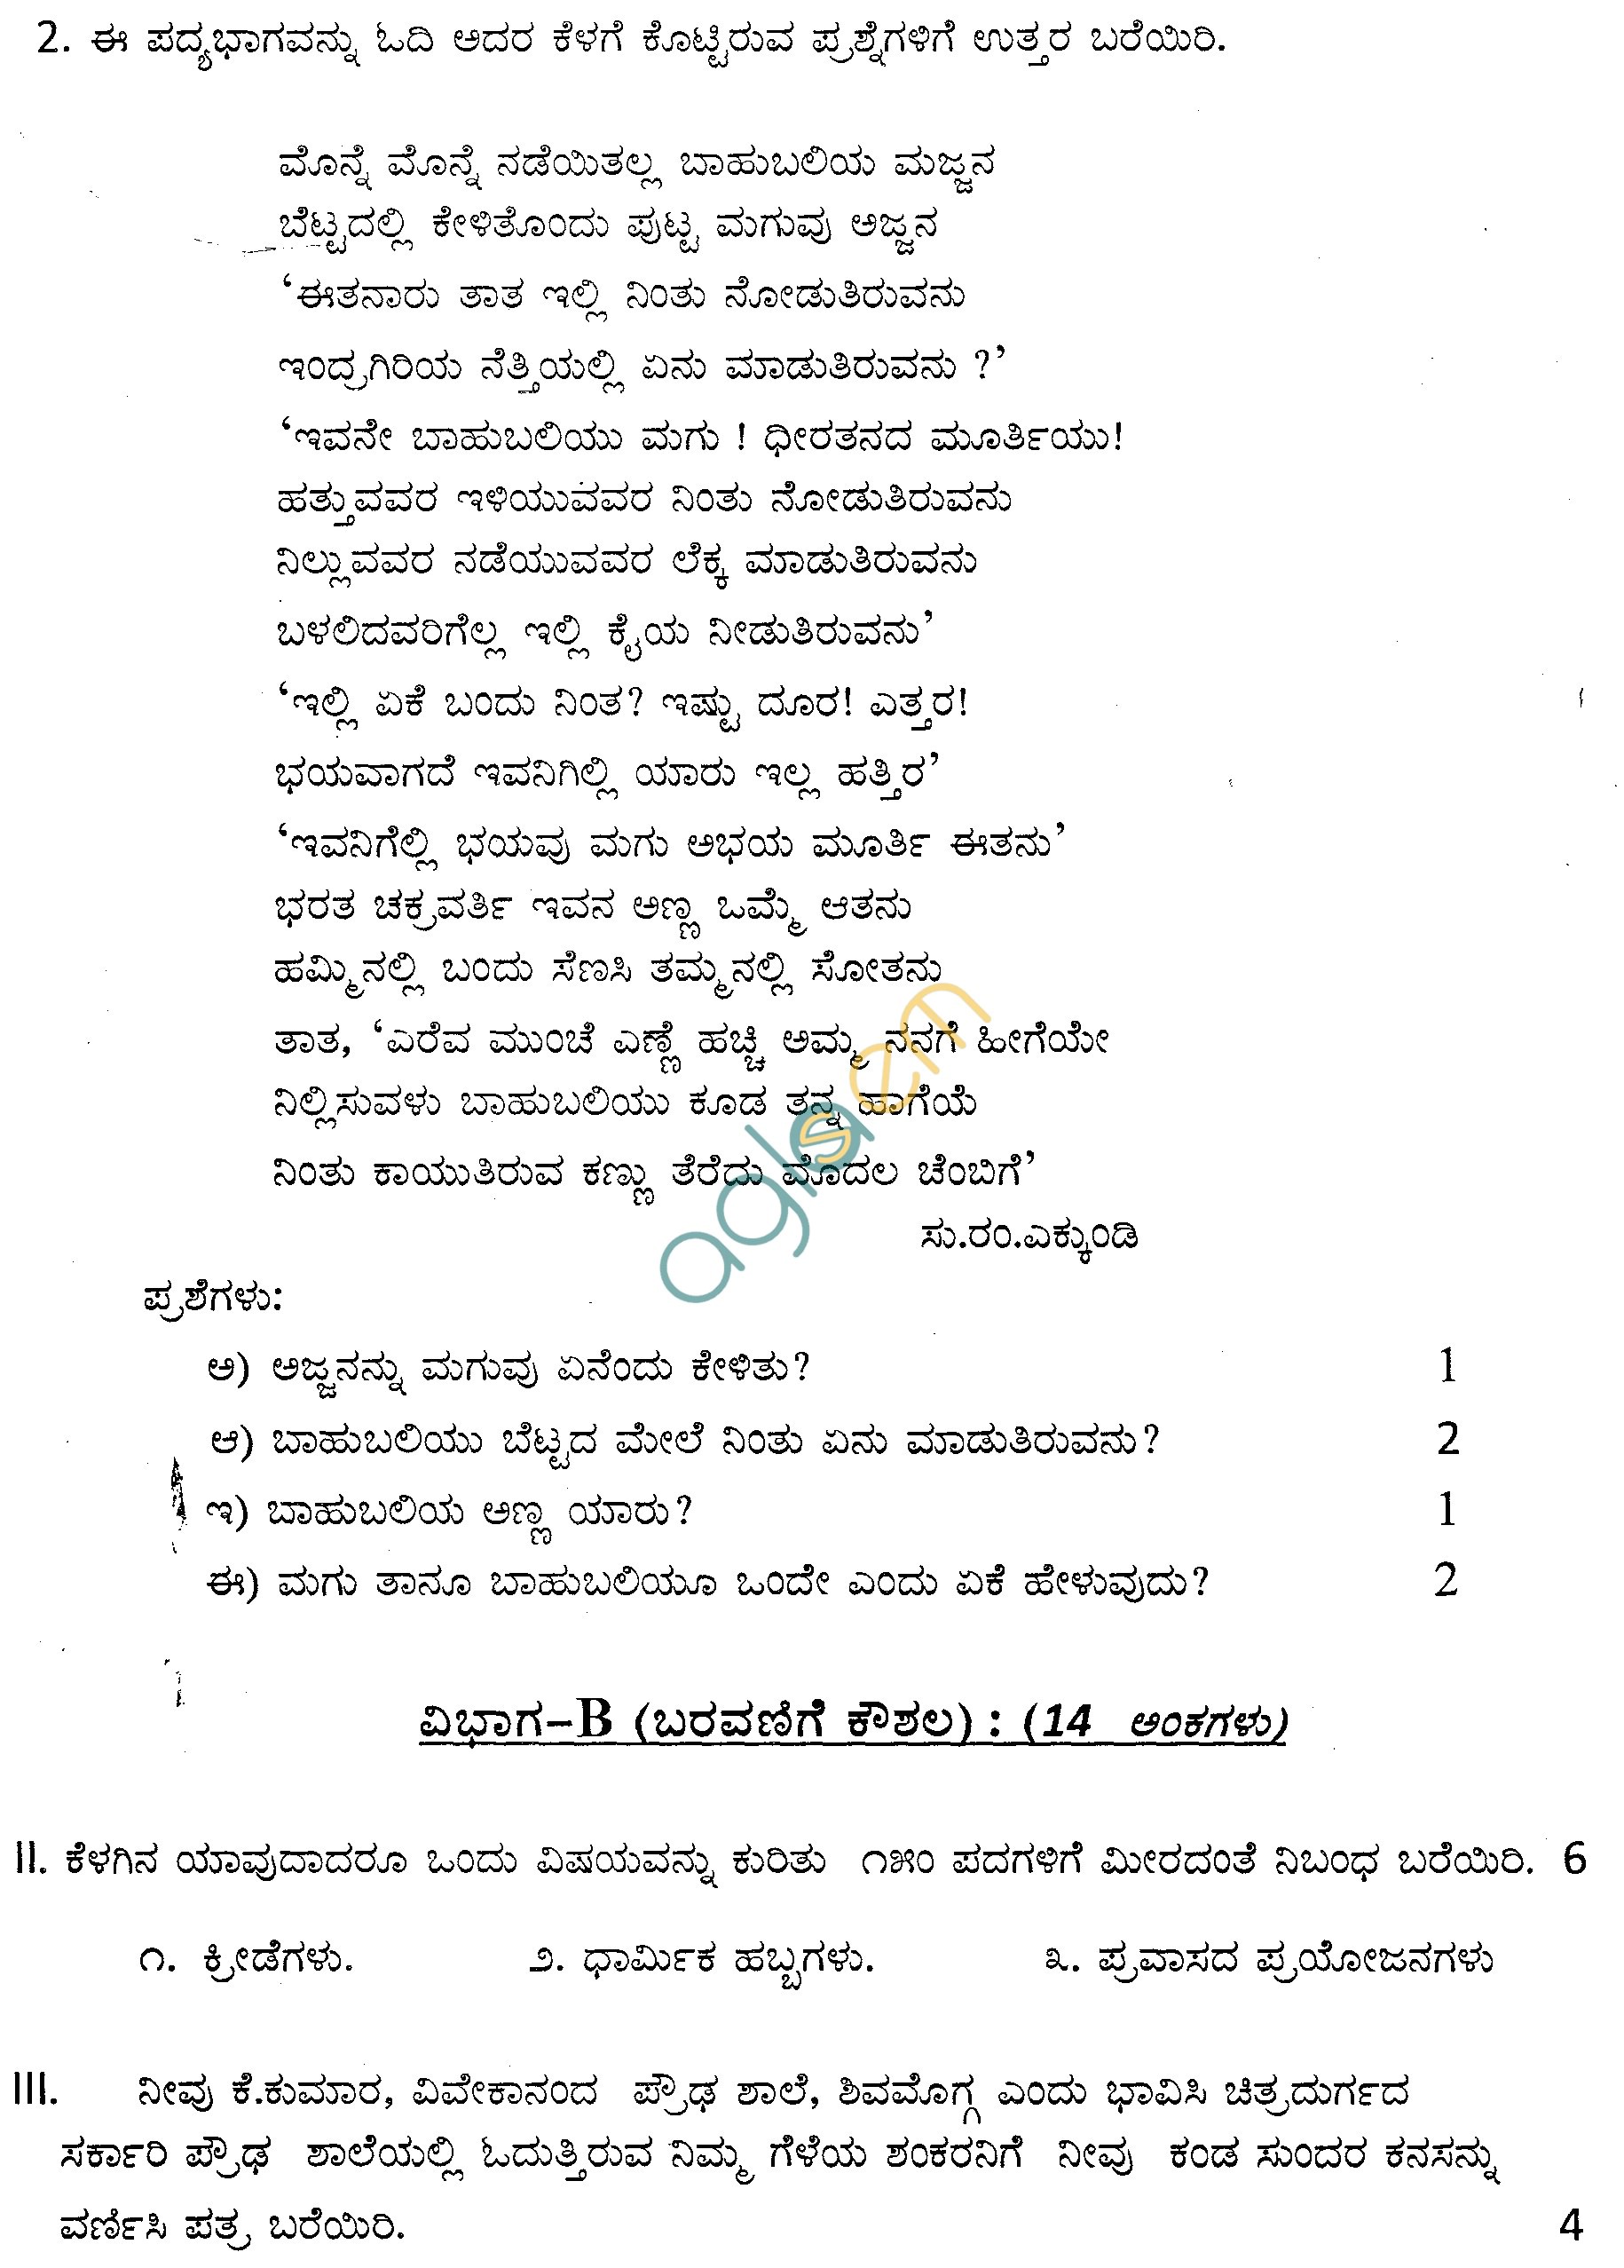 Cbse Sample Papers For Class 9 And Class 10 Sa2 Kannada